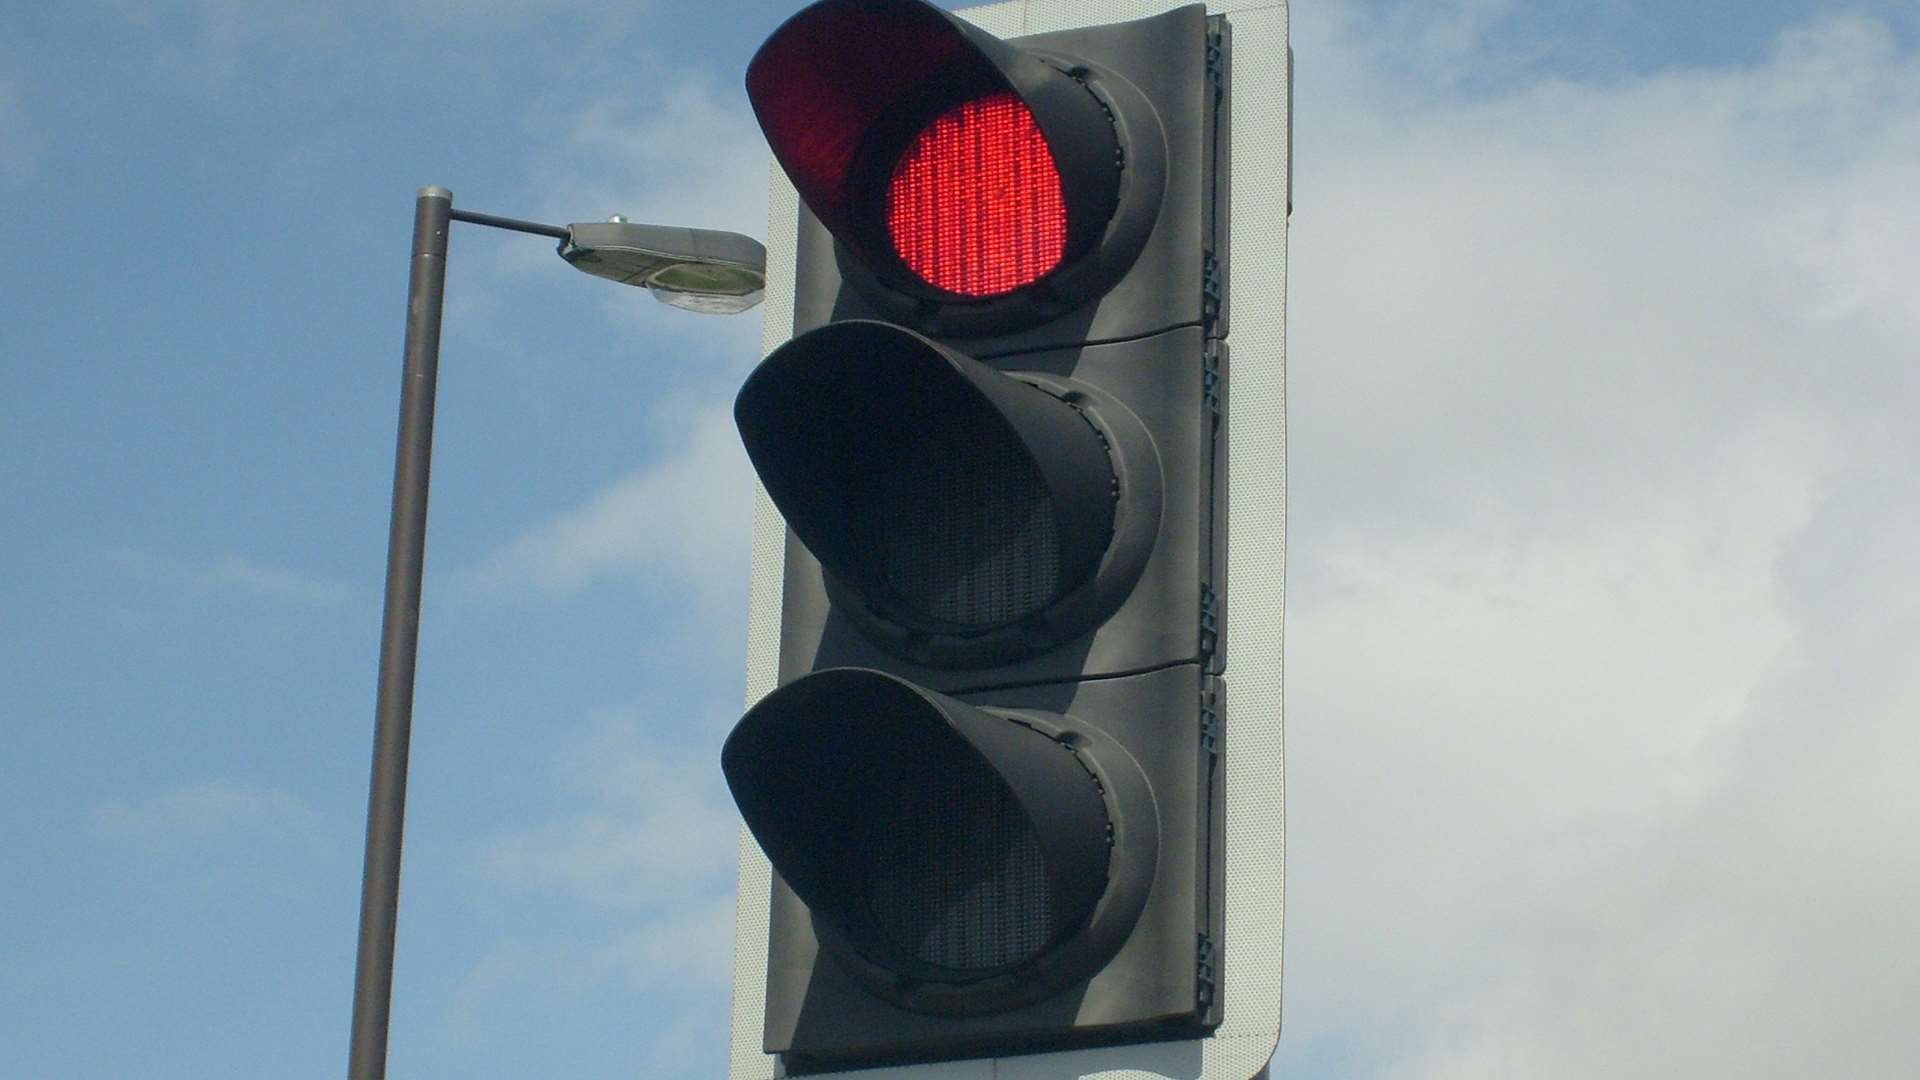 The traffic lights are out. Stock image